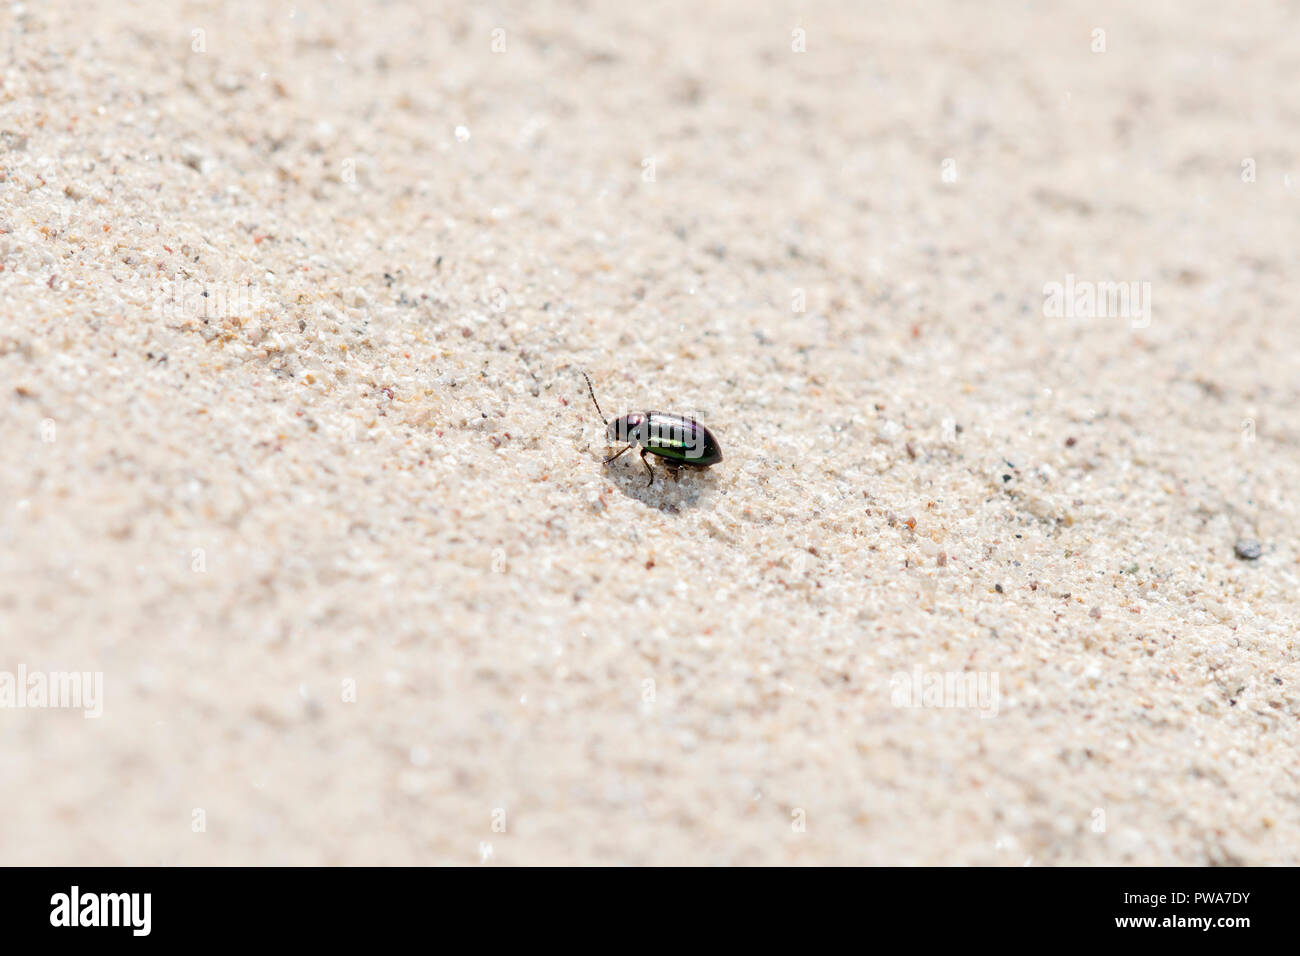 Metallic Purple and Green Flea Beetle (Altica sp.) Crawling on Sandstone on the Eastern Plains of Colorado Stock Photo